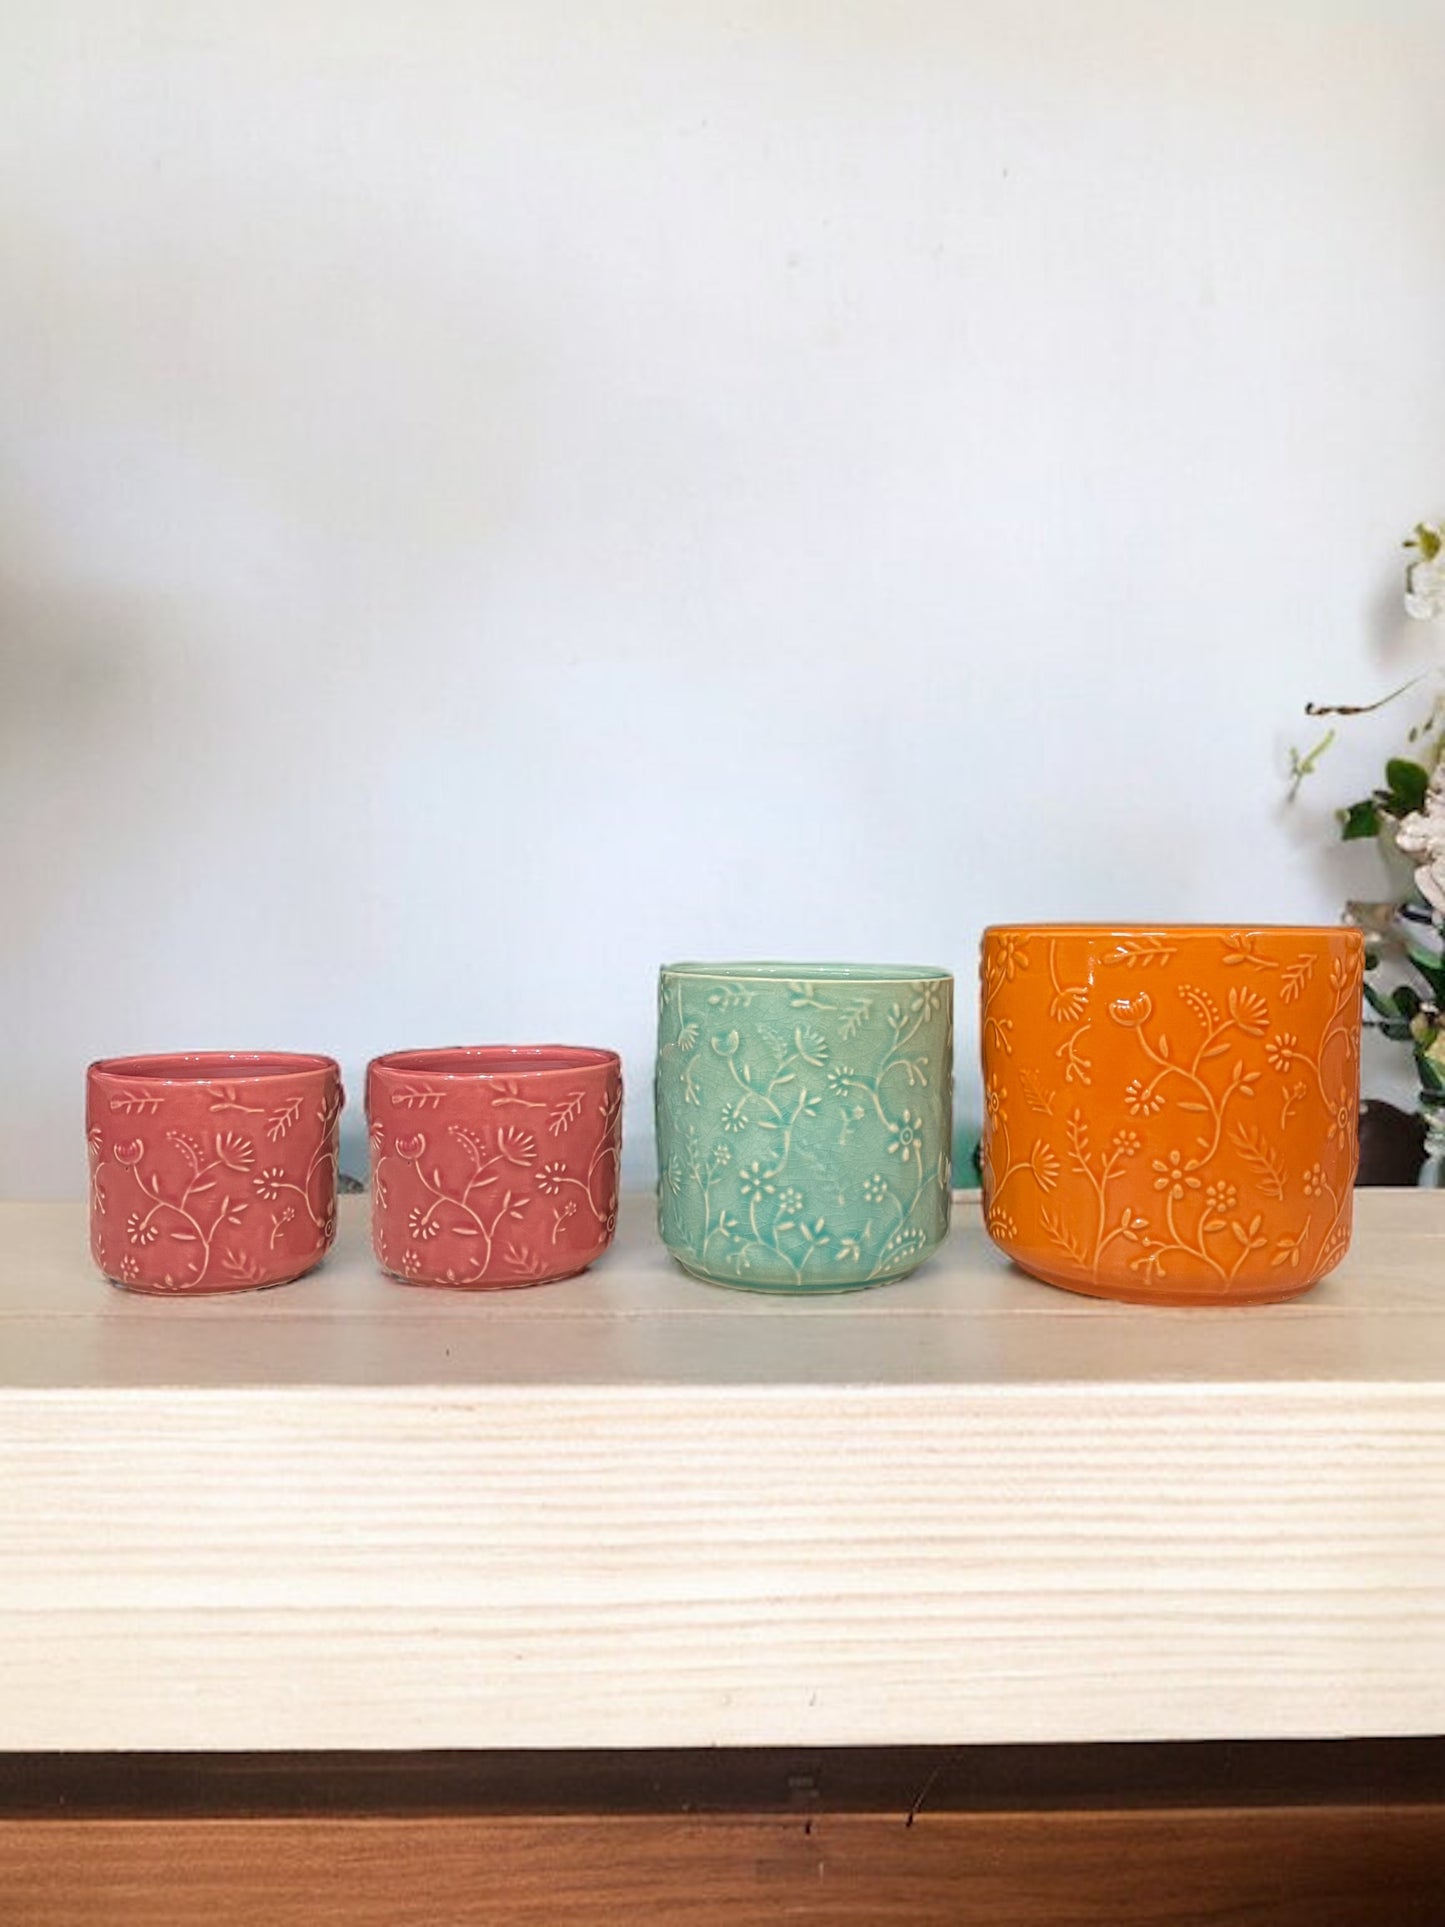 Ceramic Containers - Decor, Christmas, New Year’s, Gifts for kids, work-from-home, co-workers, friends and family